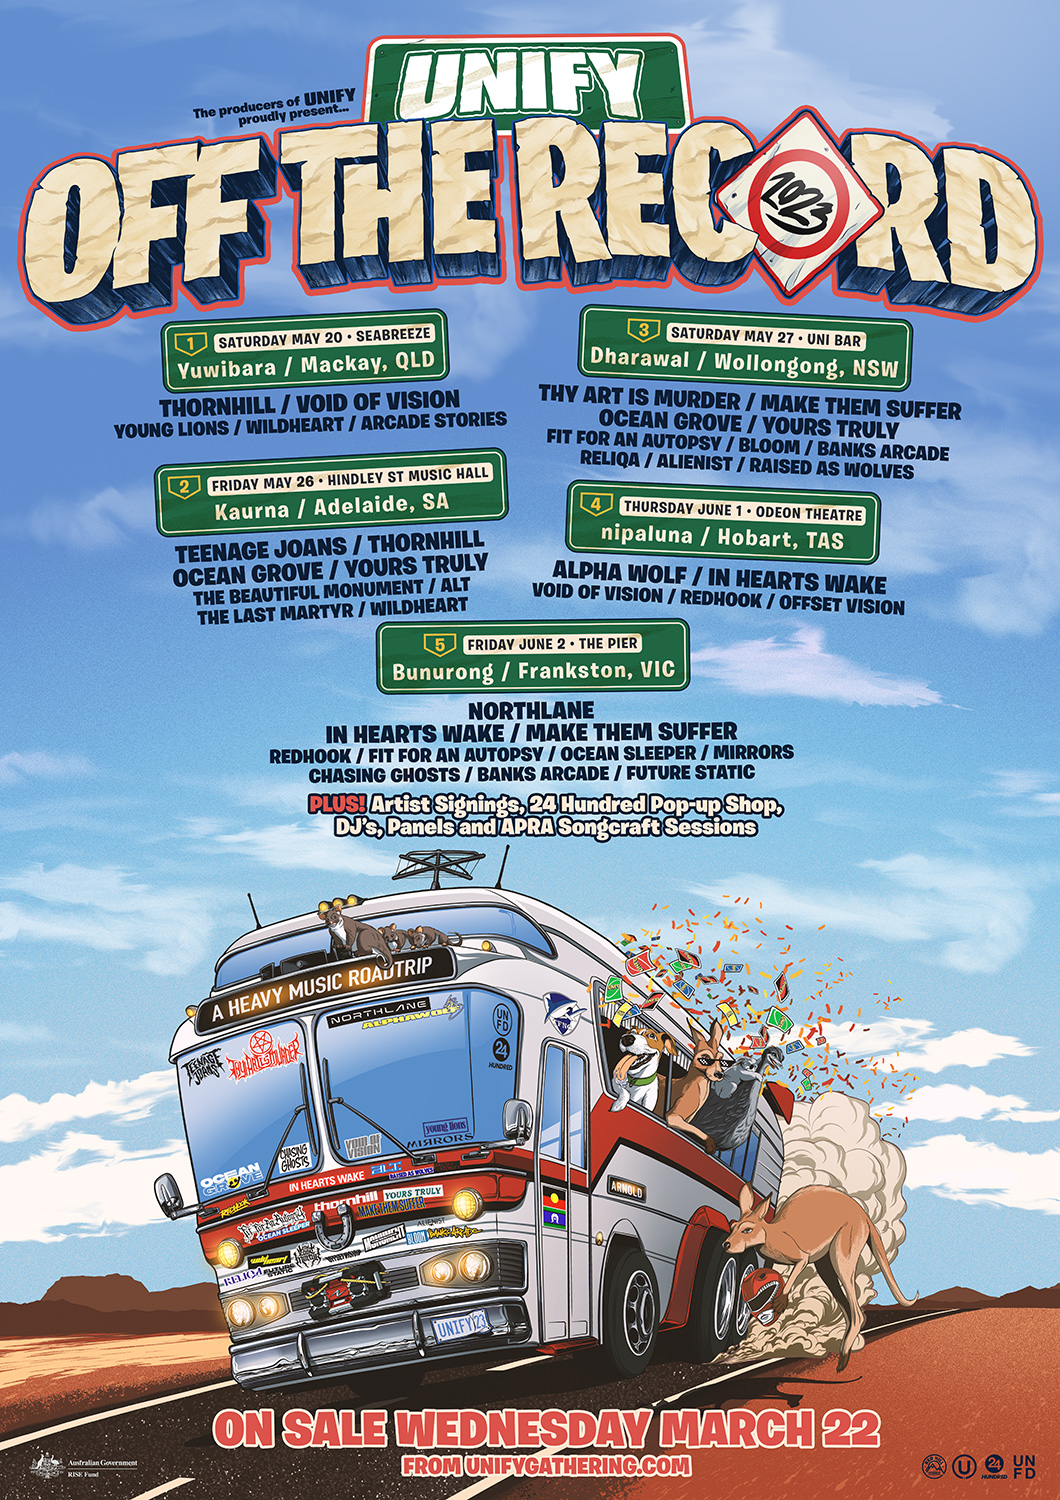 Unify Off The Record poster